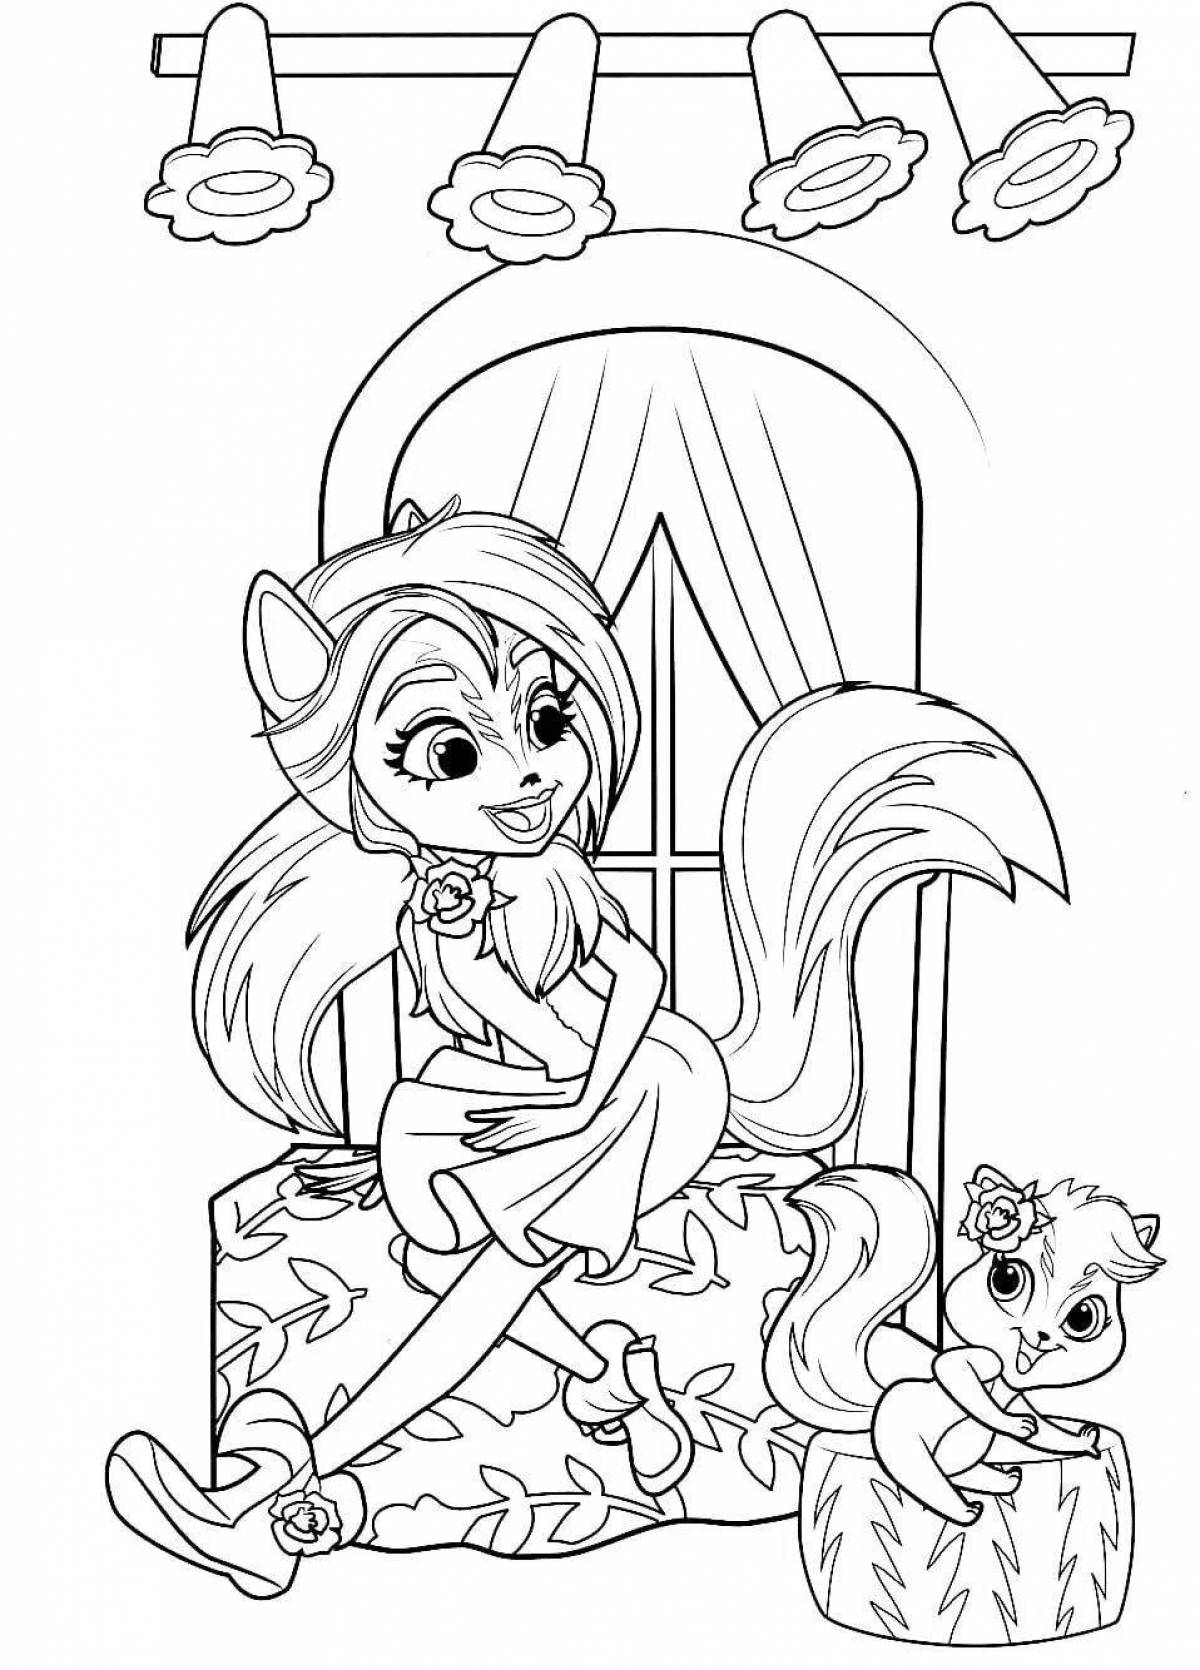 Enchantimals coloring pages